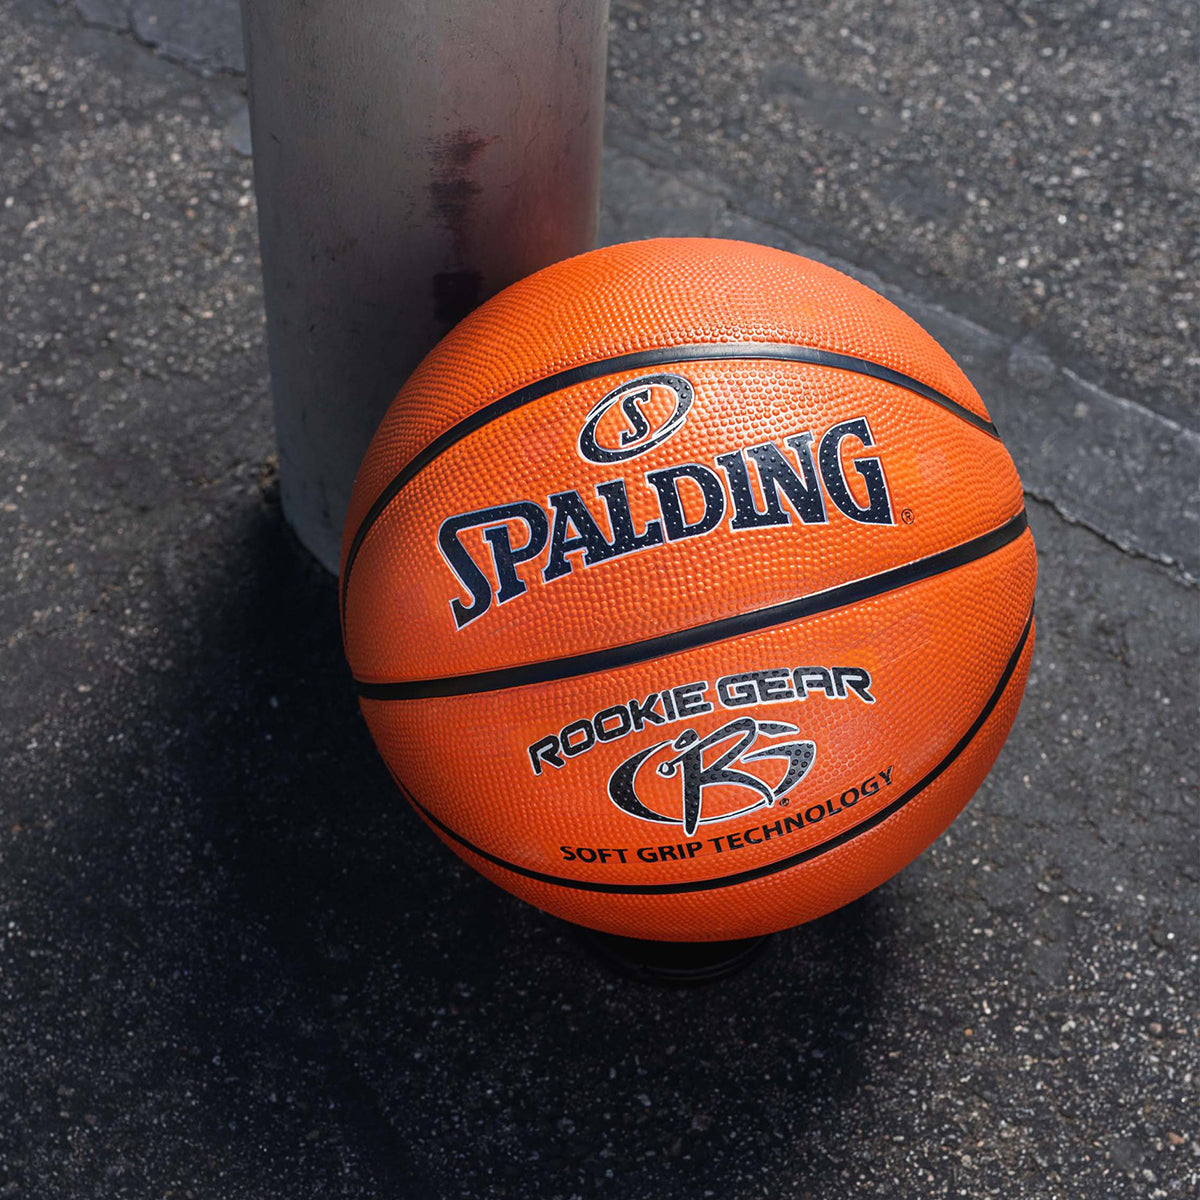 Spalding Youth Rookie Gear Soft Grip 27.5" Indoor/Outdoor Basketball Spalding